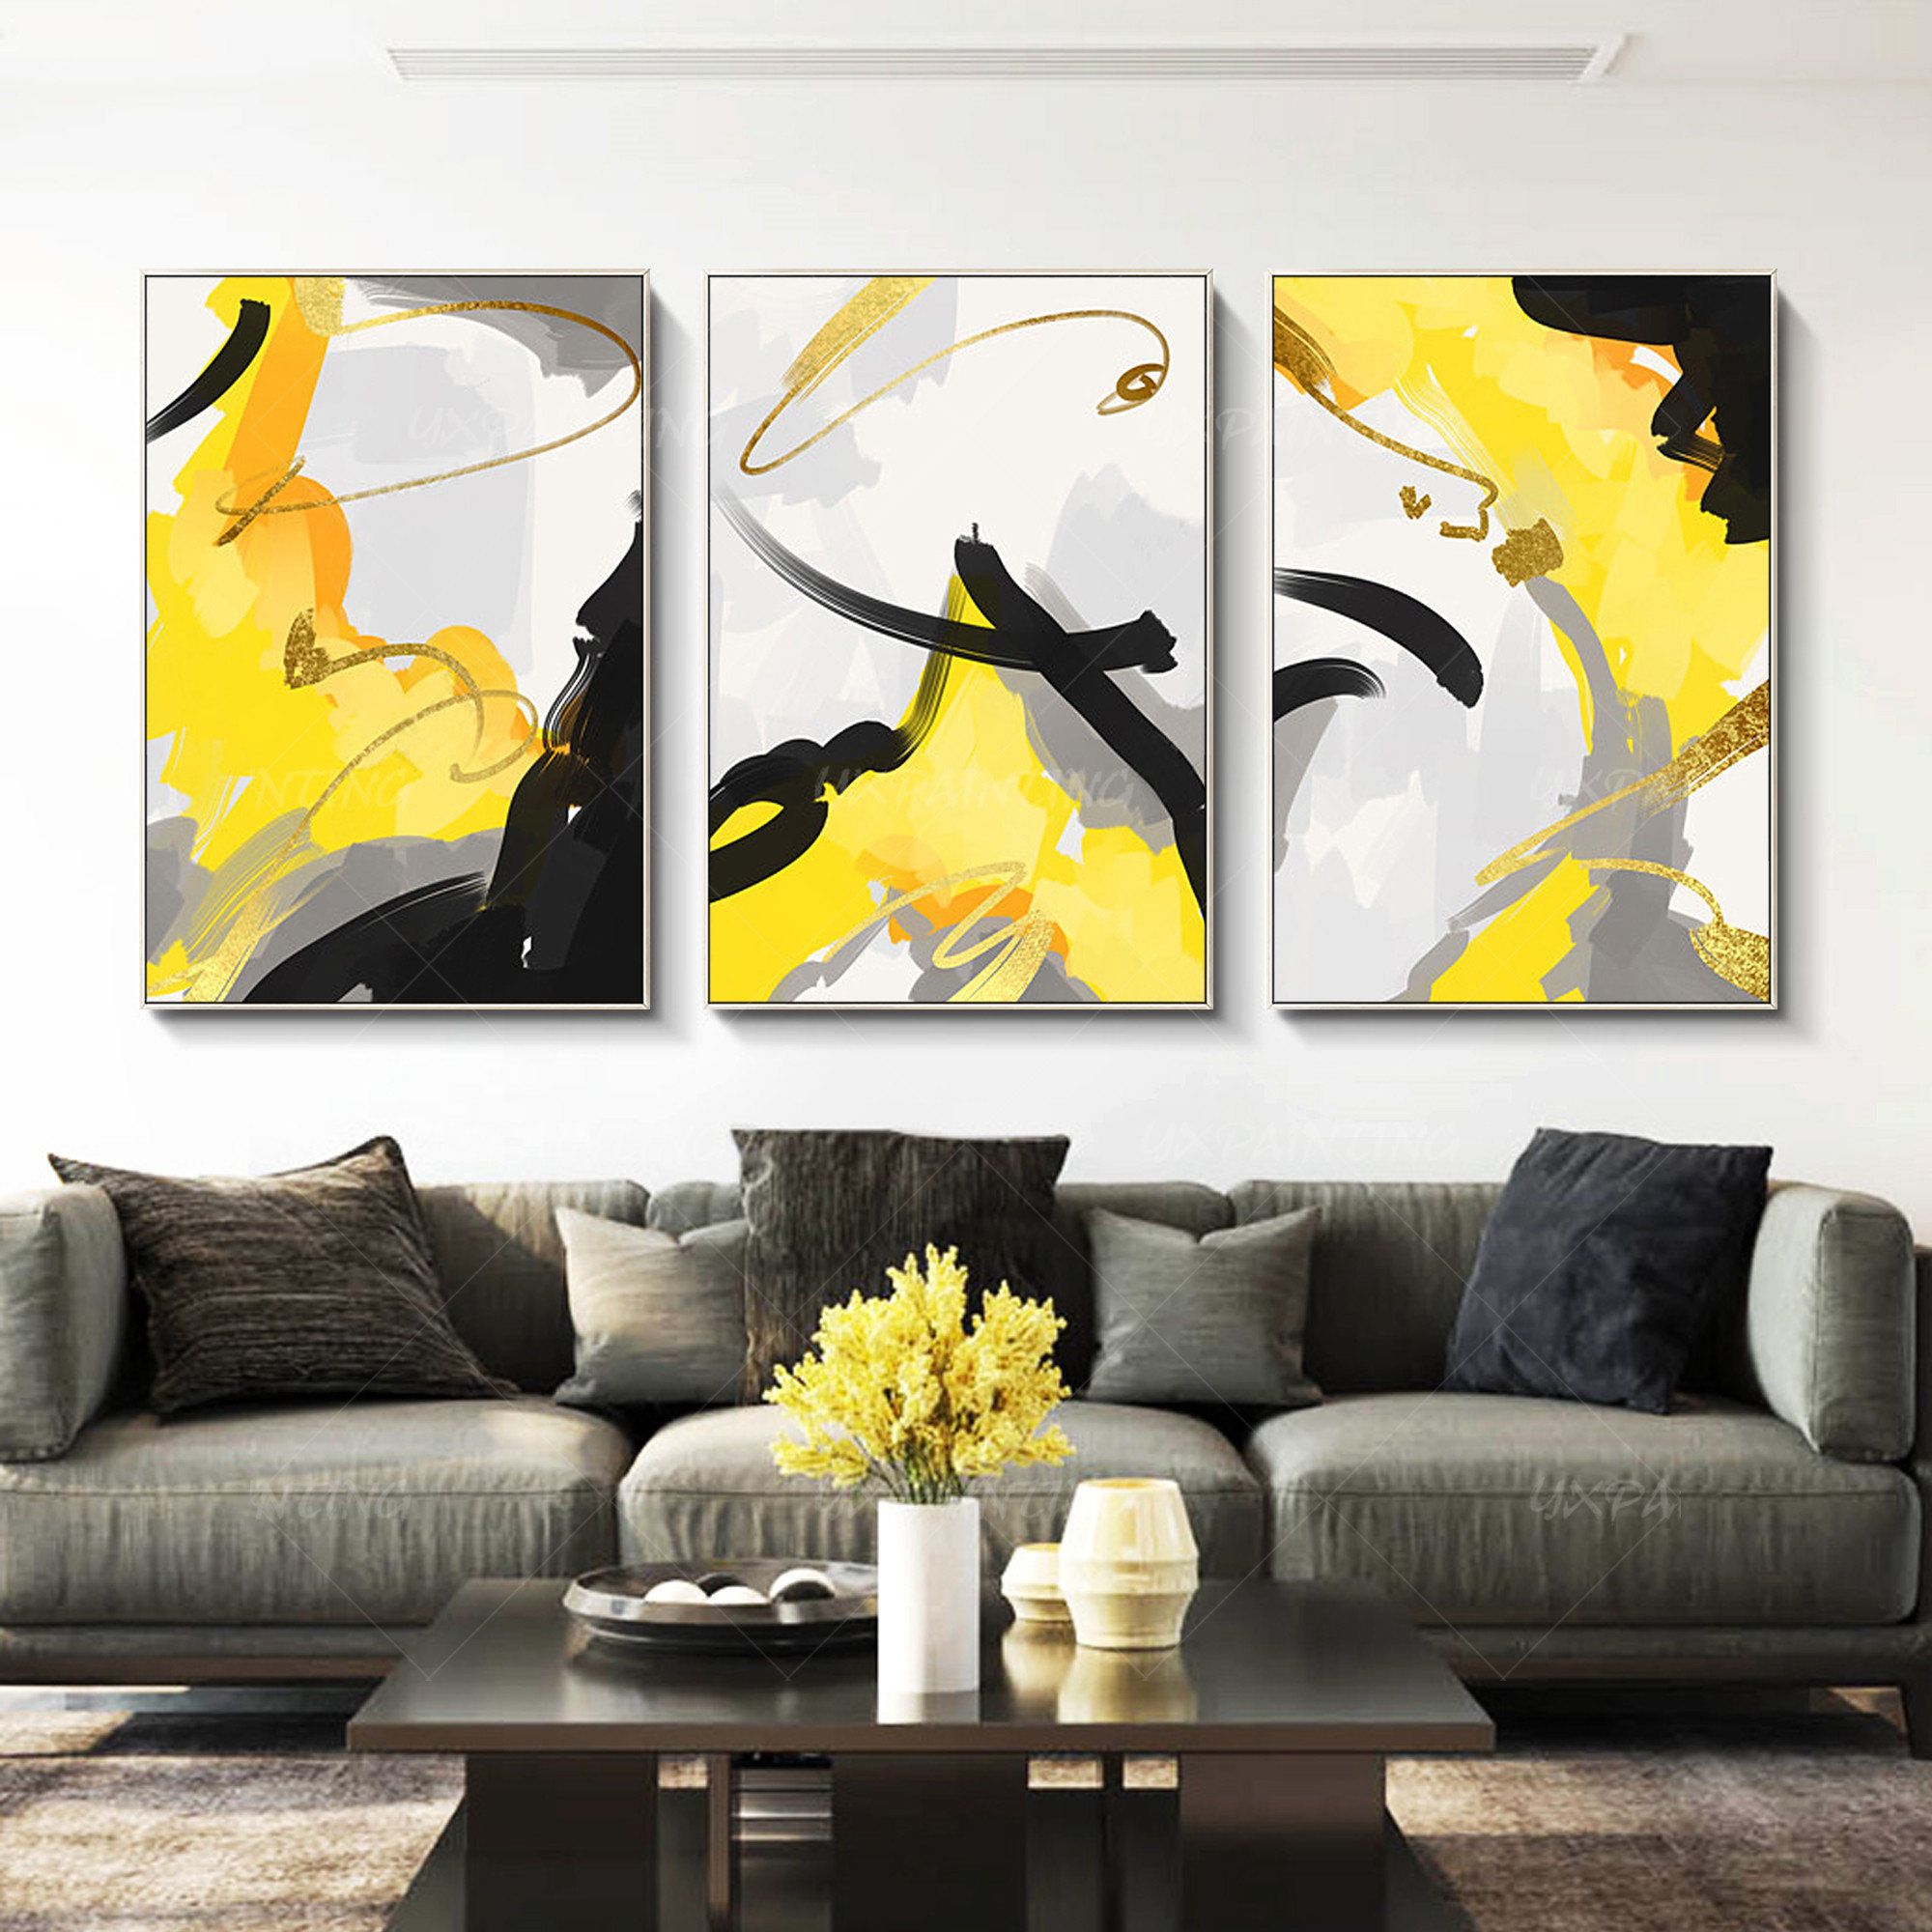 Create Attractive Focal Points in Yellow